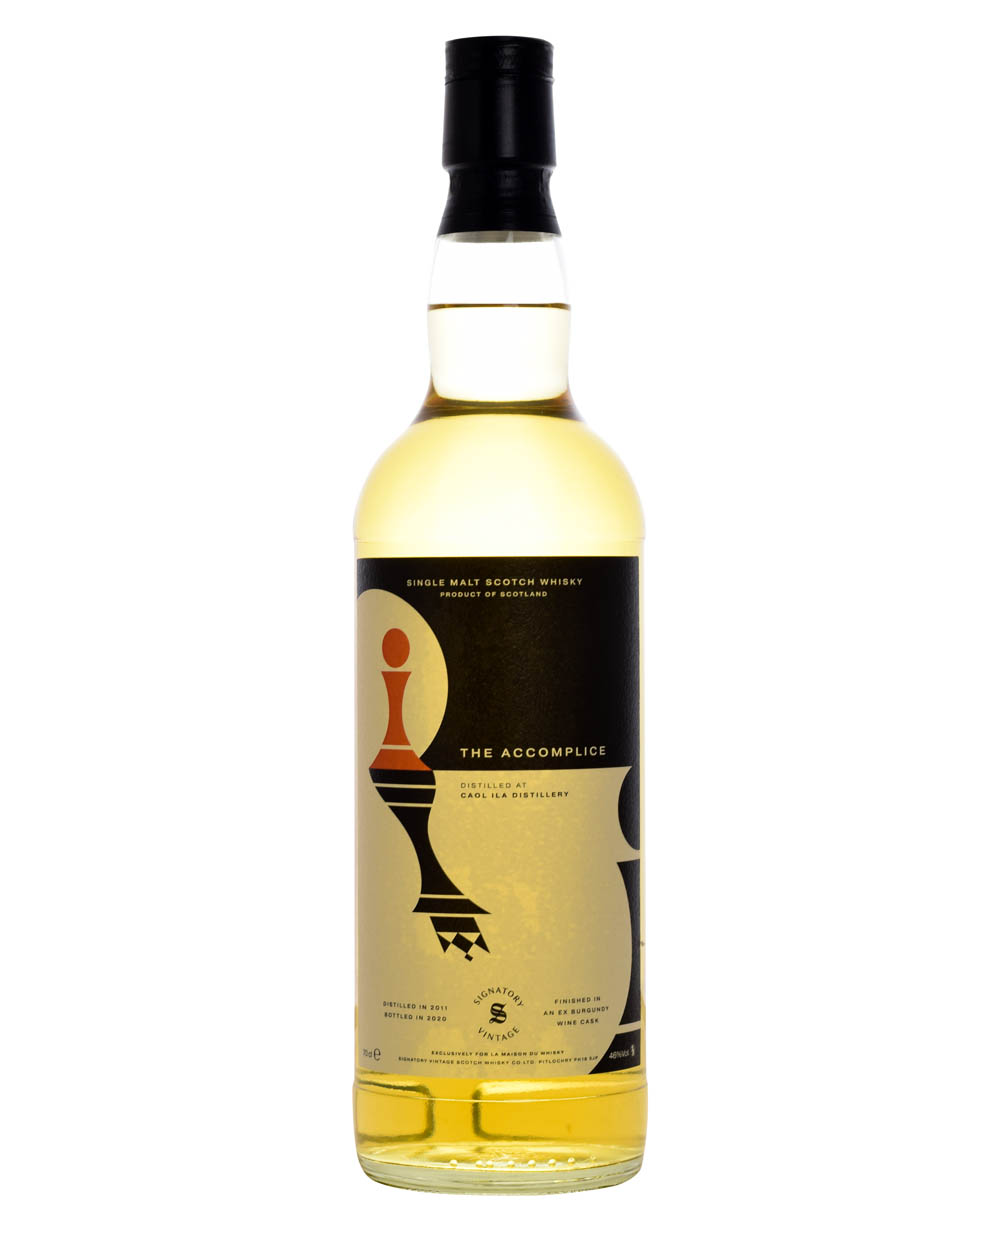 Caol Ila 9 Years Old 2011 The Accomplice Signatory Vintage Musthave Malts MHM